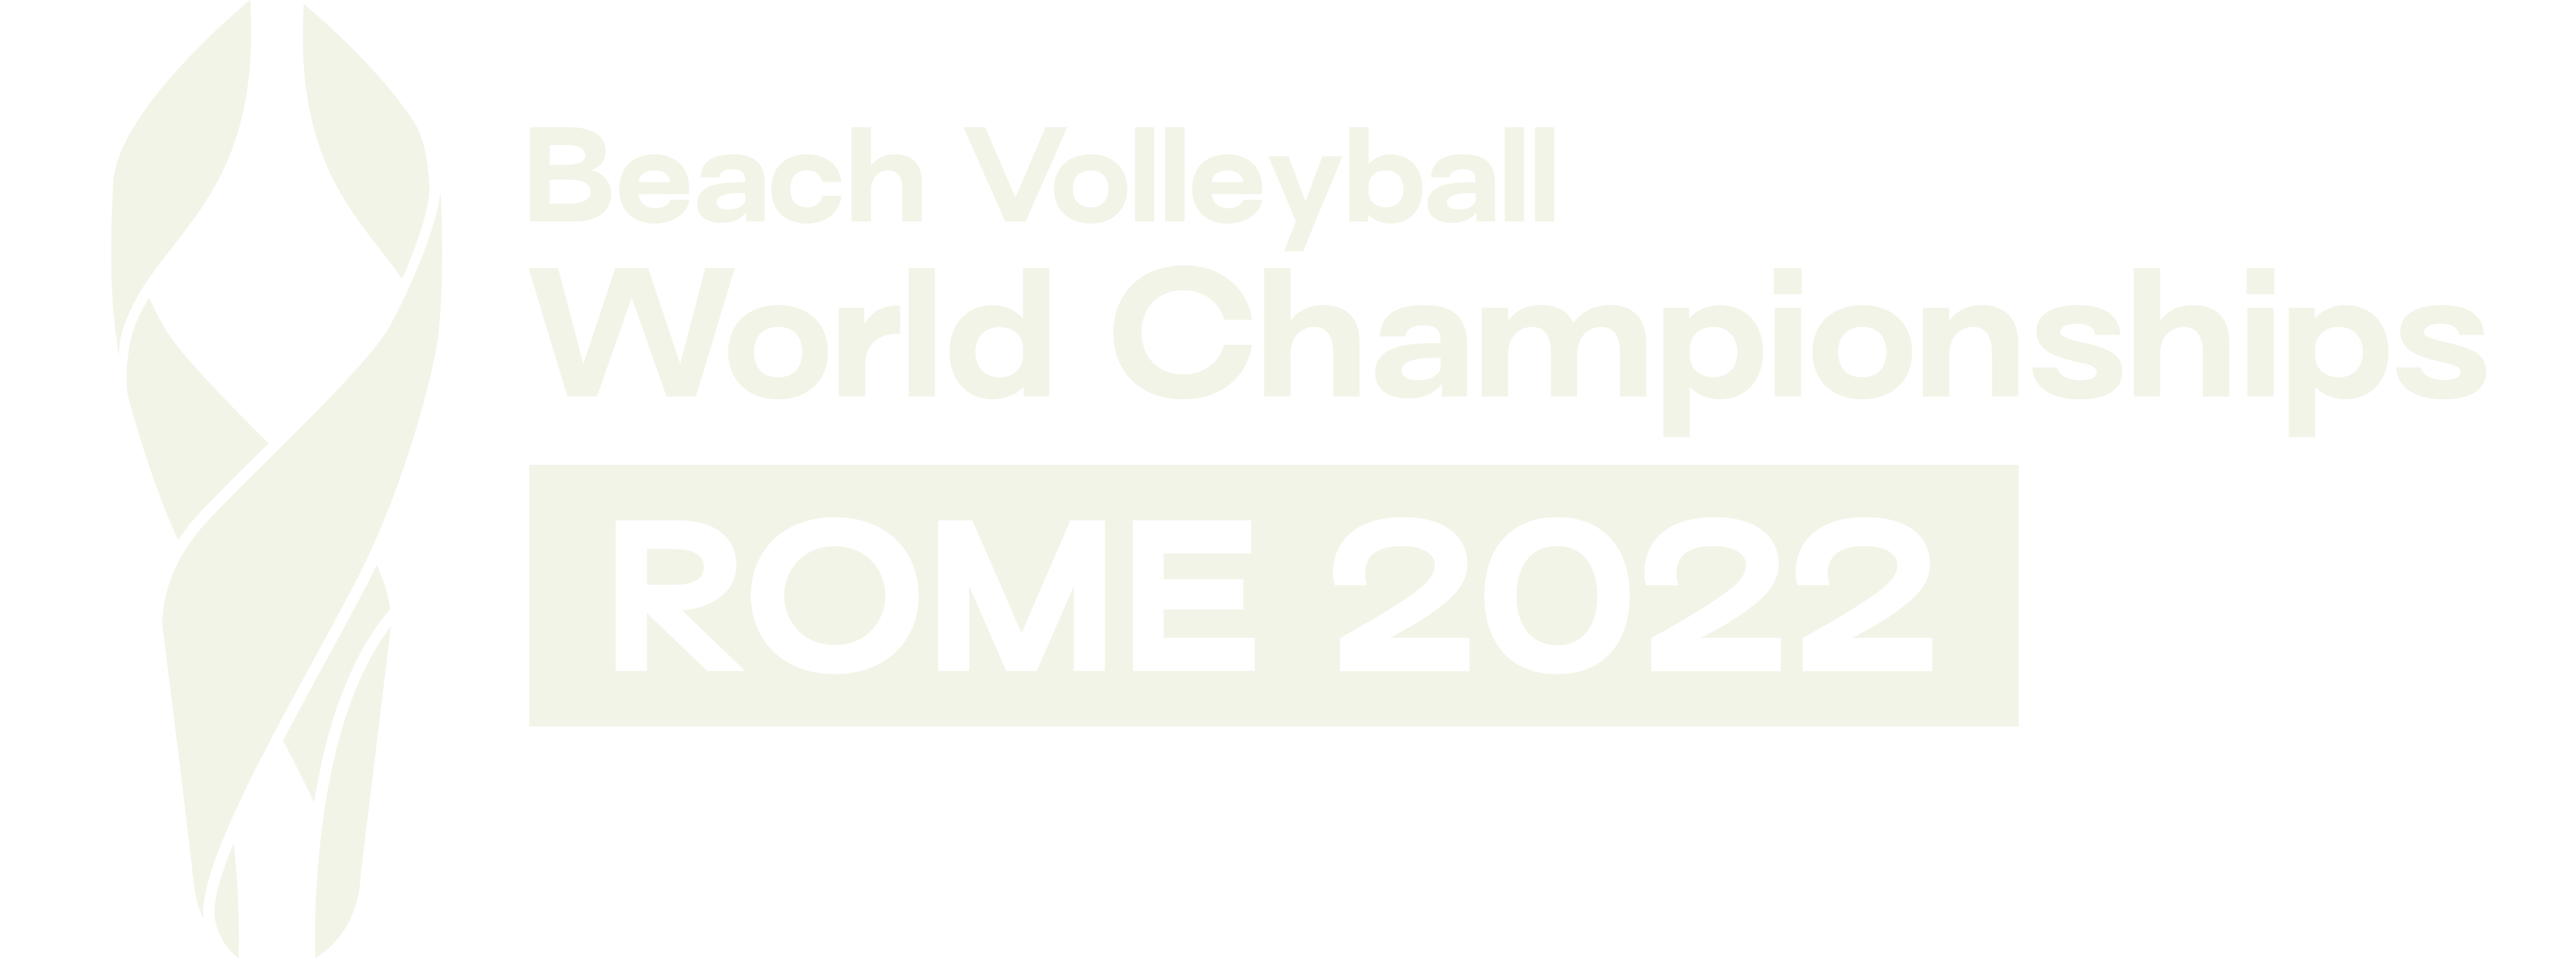 Most-watched Beach Volleyball World Championships in history volleyballworld